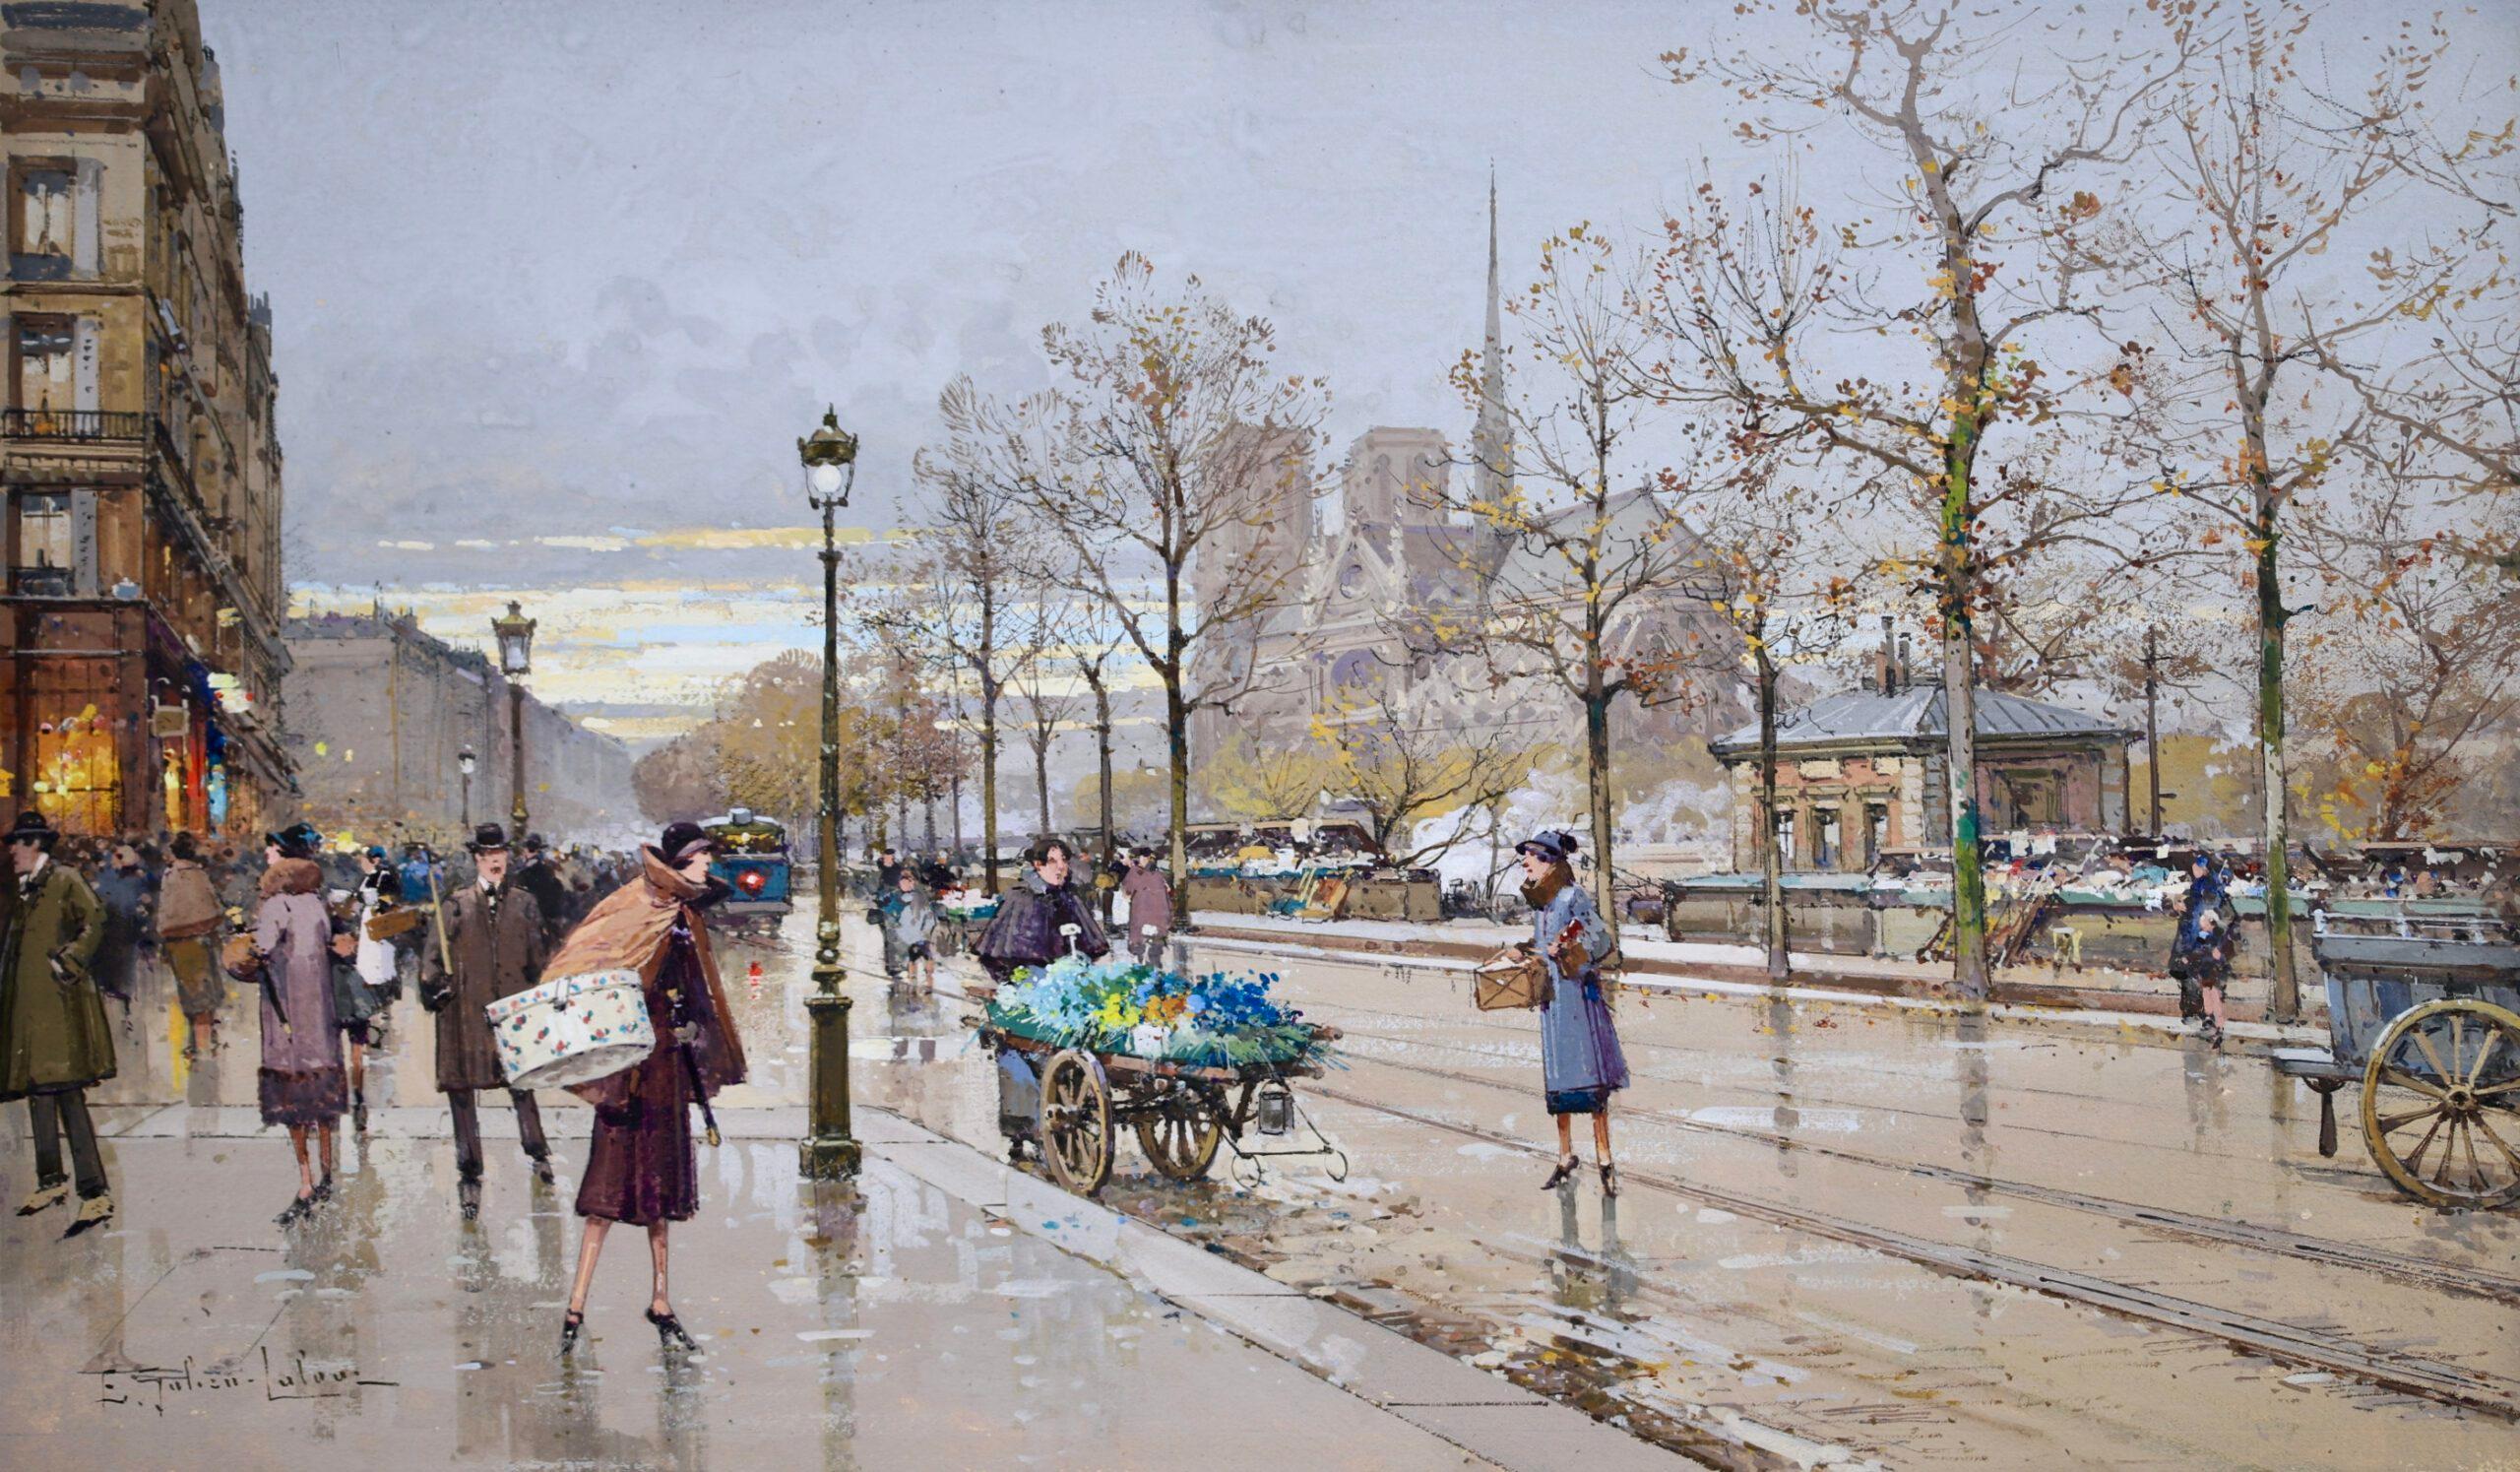 Signed impressionist gouache on paper figures in  landscape circa 1910 by French painter Eugene Galien-Laloue. The piece depicts a street scene at the Quai de la Tournelle, located along the River Seine in the Saint-Victor district of Paris. A